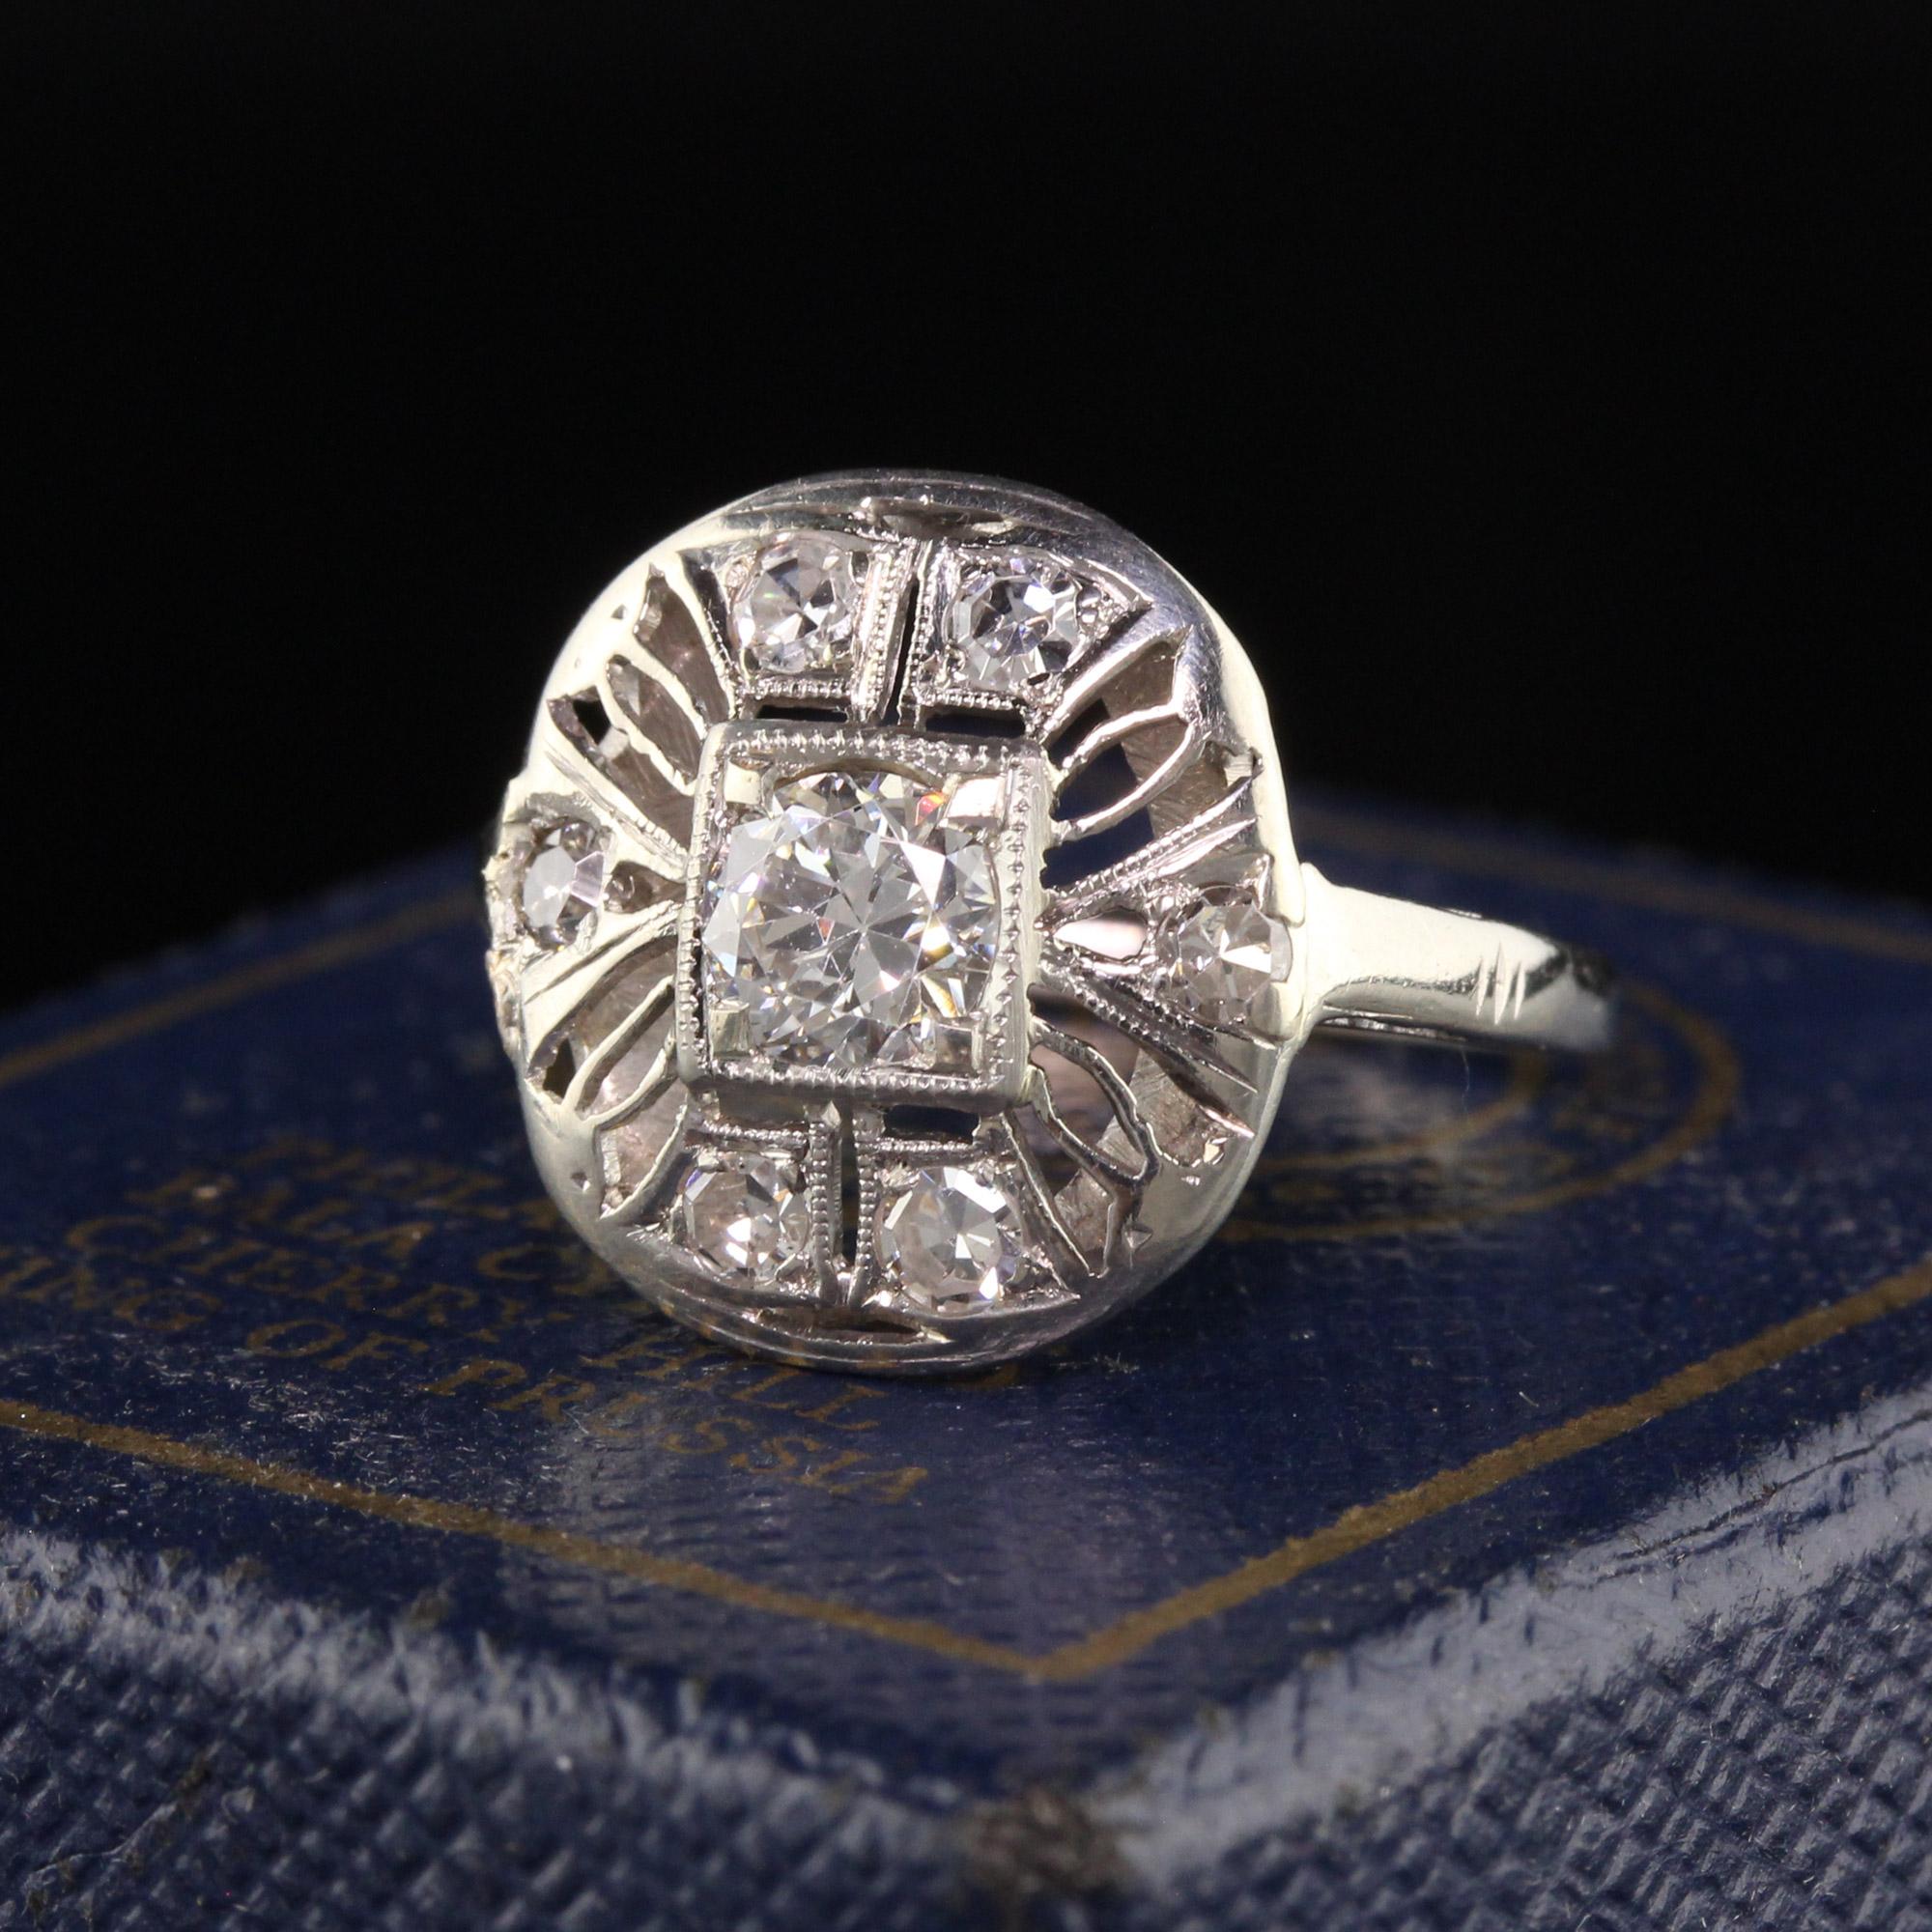 Beautiful Antique Art Deco 14K White Gold Old European Cut Diamond Engagement Ring. This gorgeous engagement ring is crafted in 14K white gold and has gorgeous filigree work on the top of the ring.

Item #R1212

Metal: 14K White Gold

Weight: 1.8